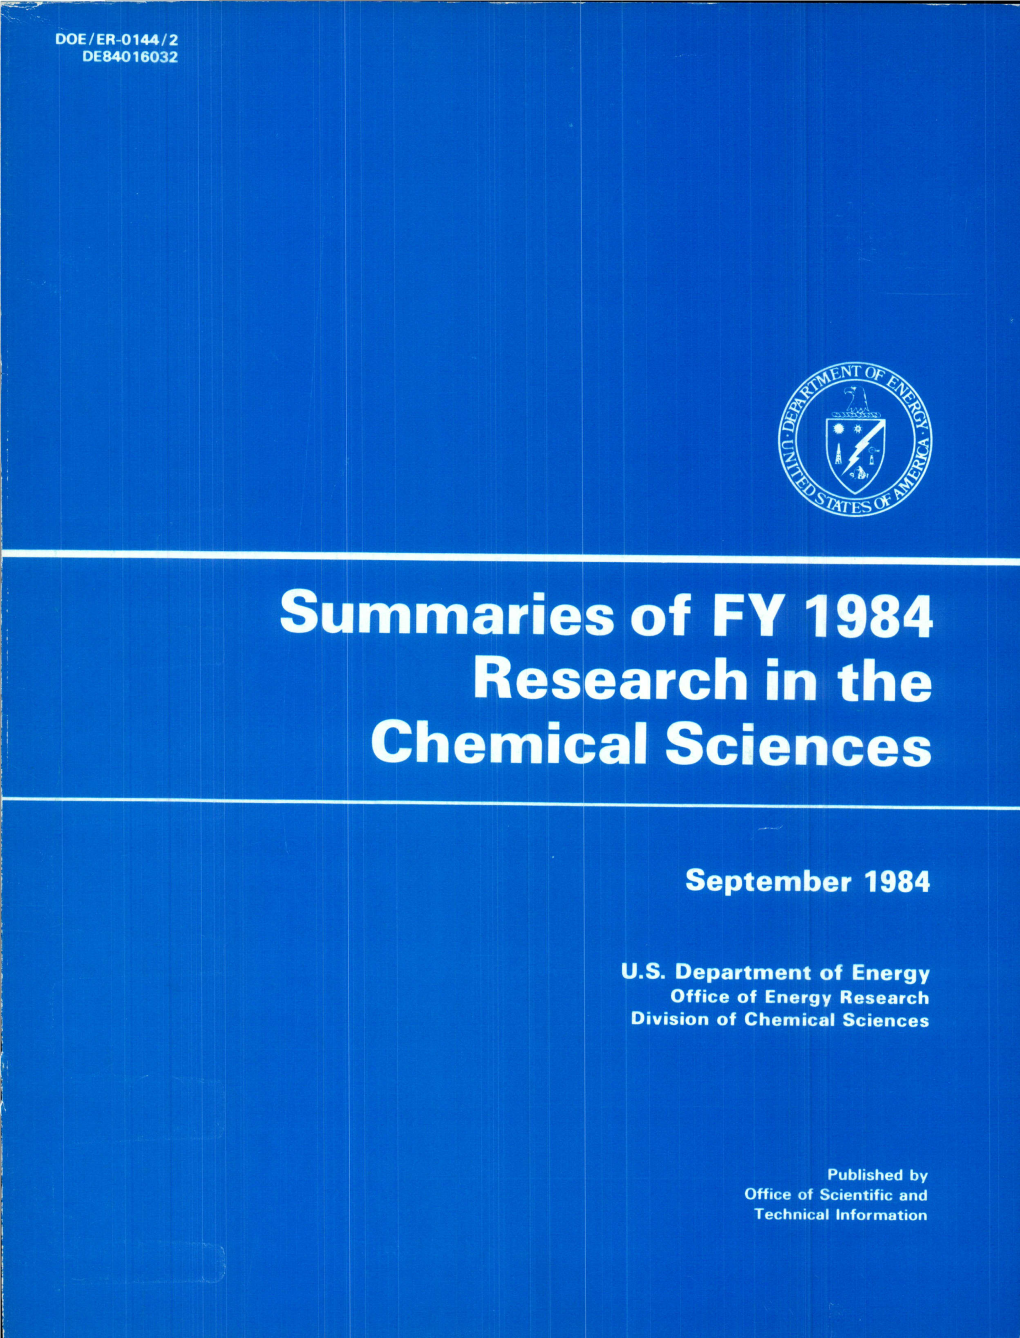 FY 1984 Research in the Chemical Sciences